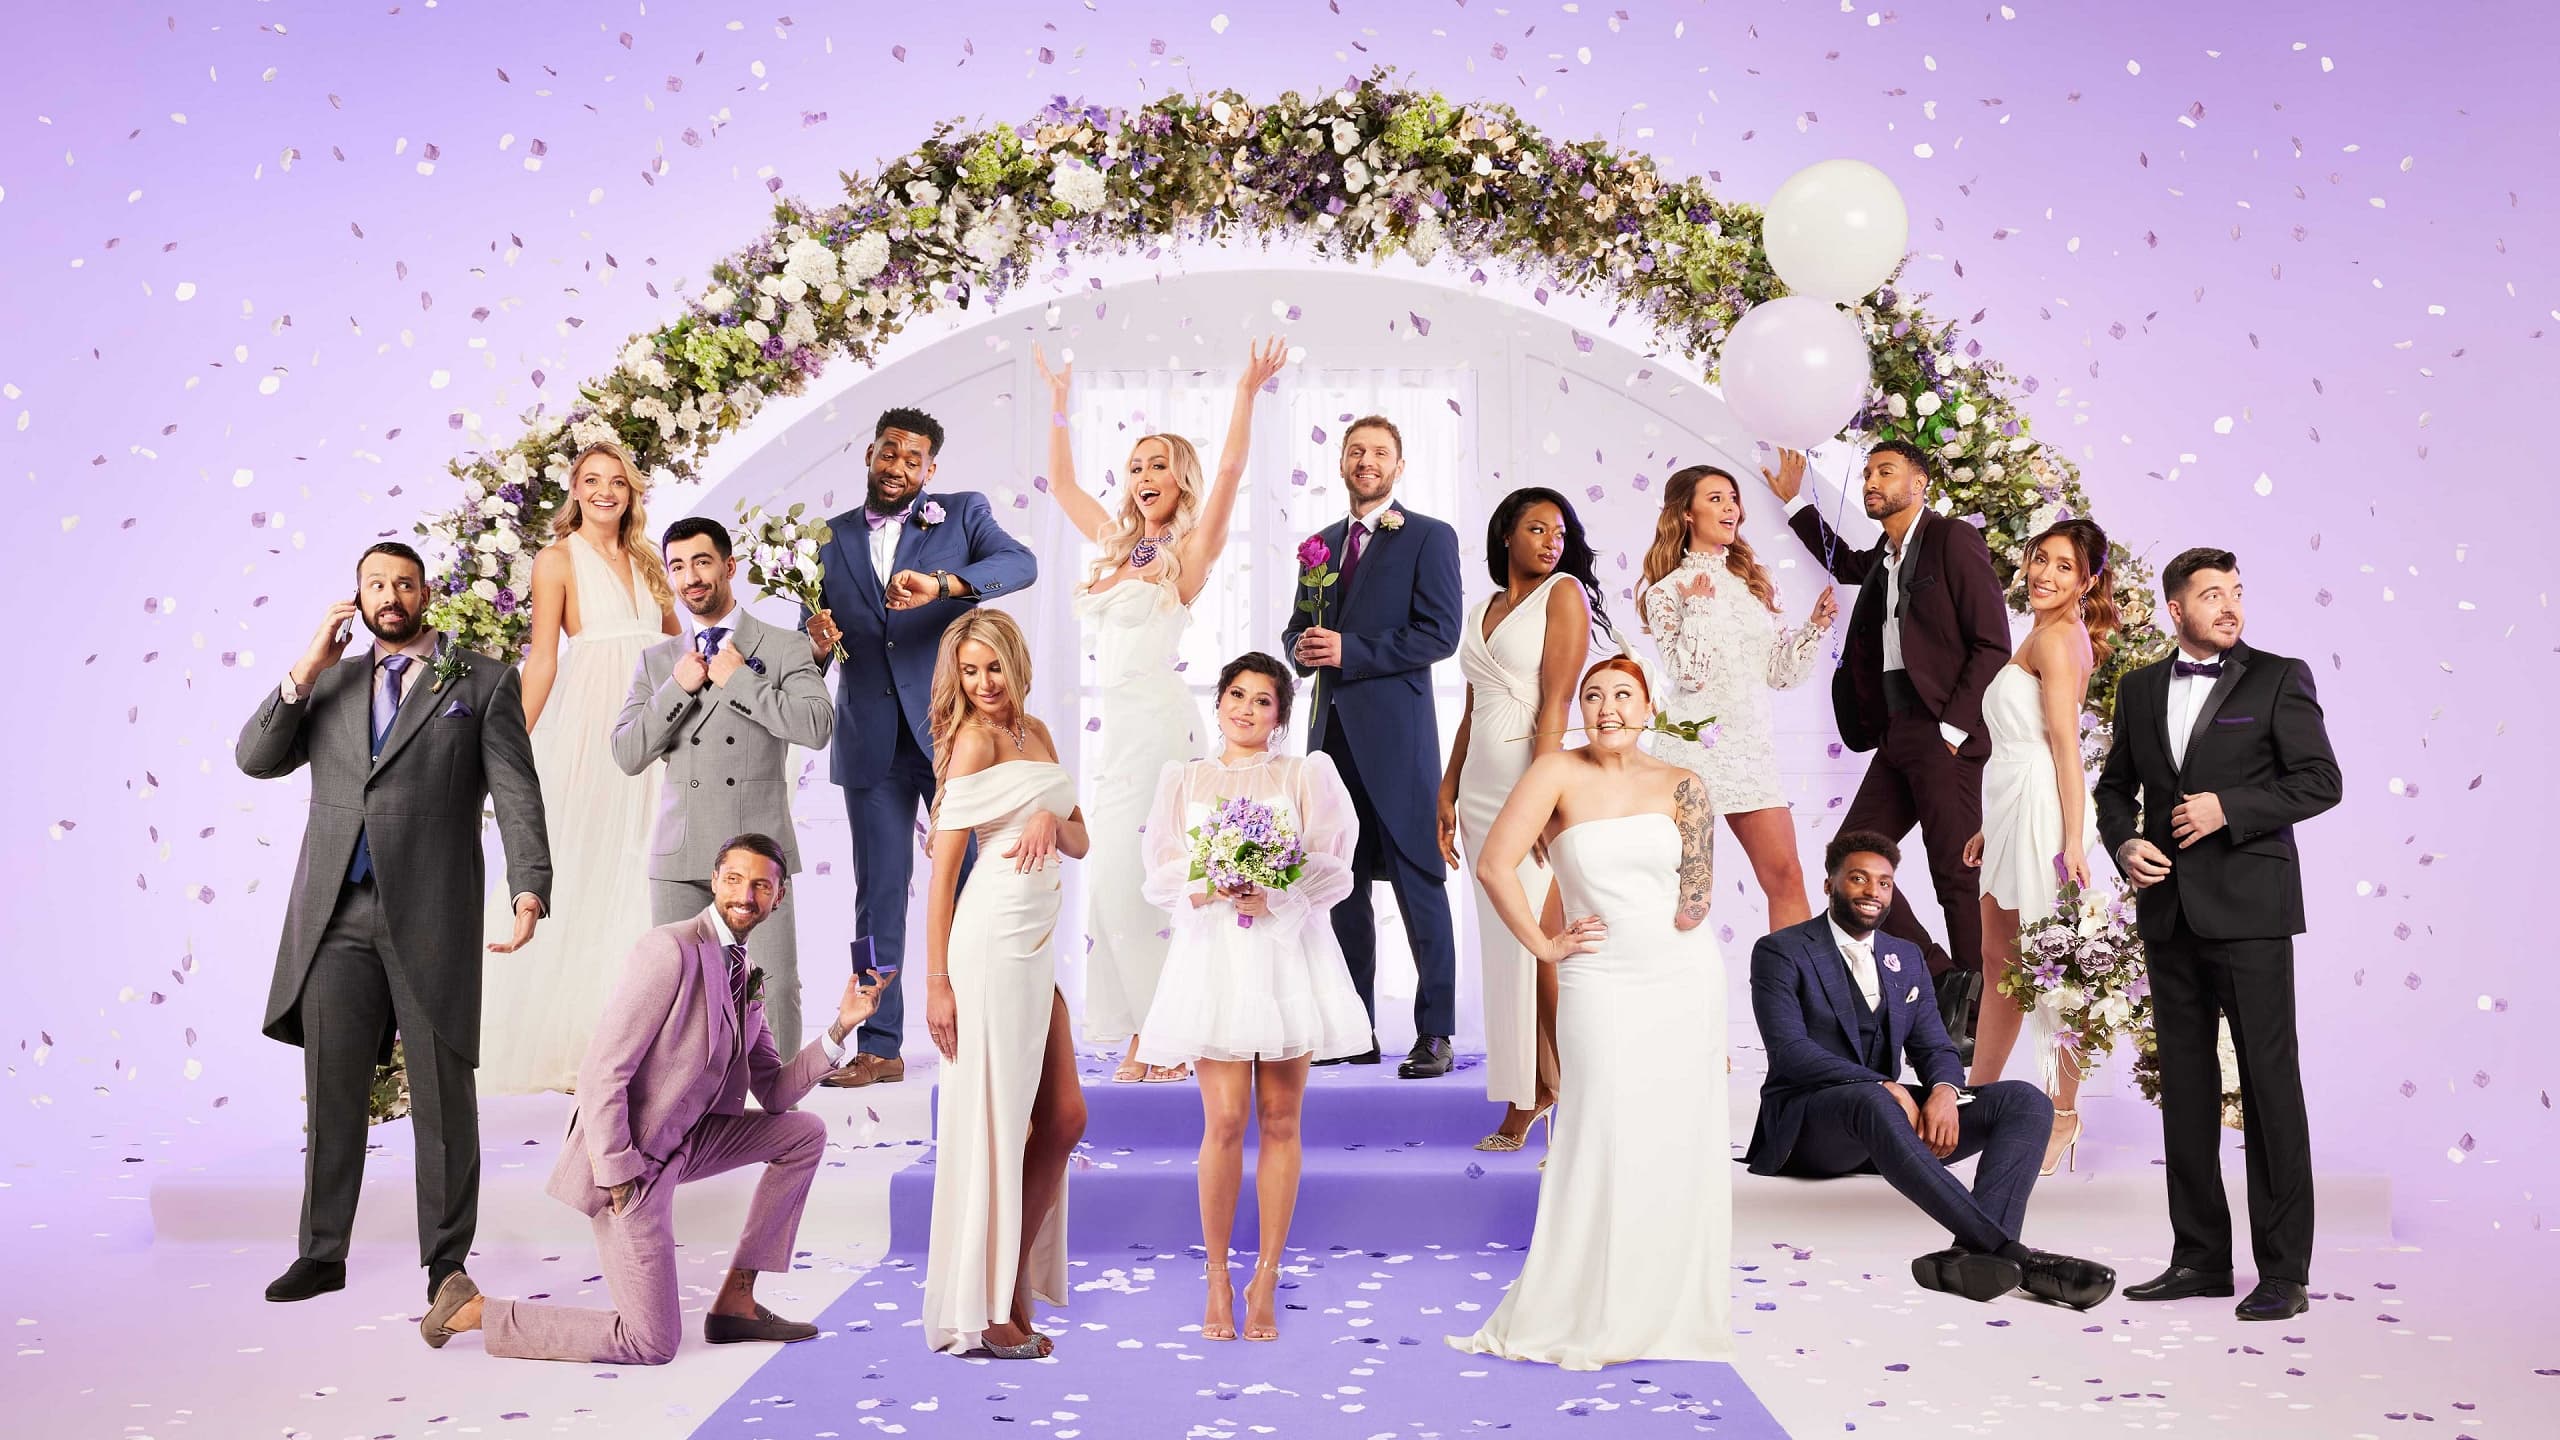 Married at First Sight UK - Season 7 Episode 29